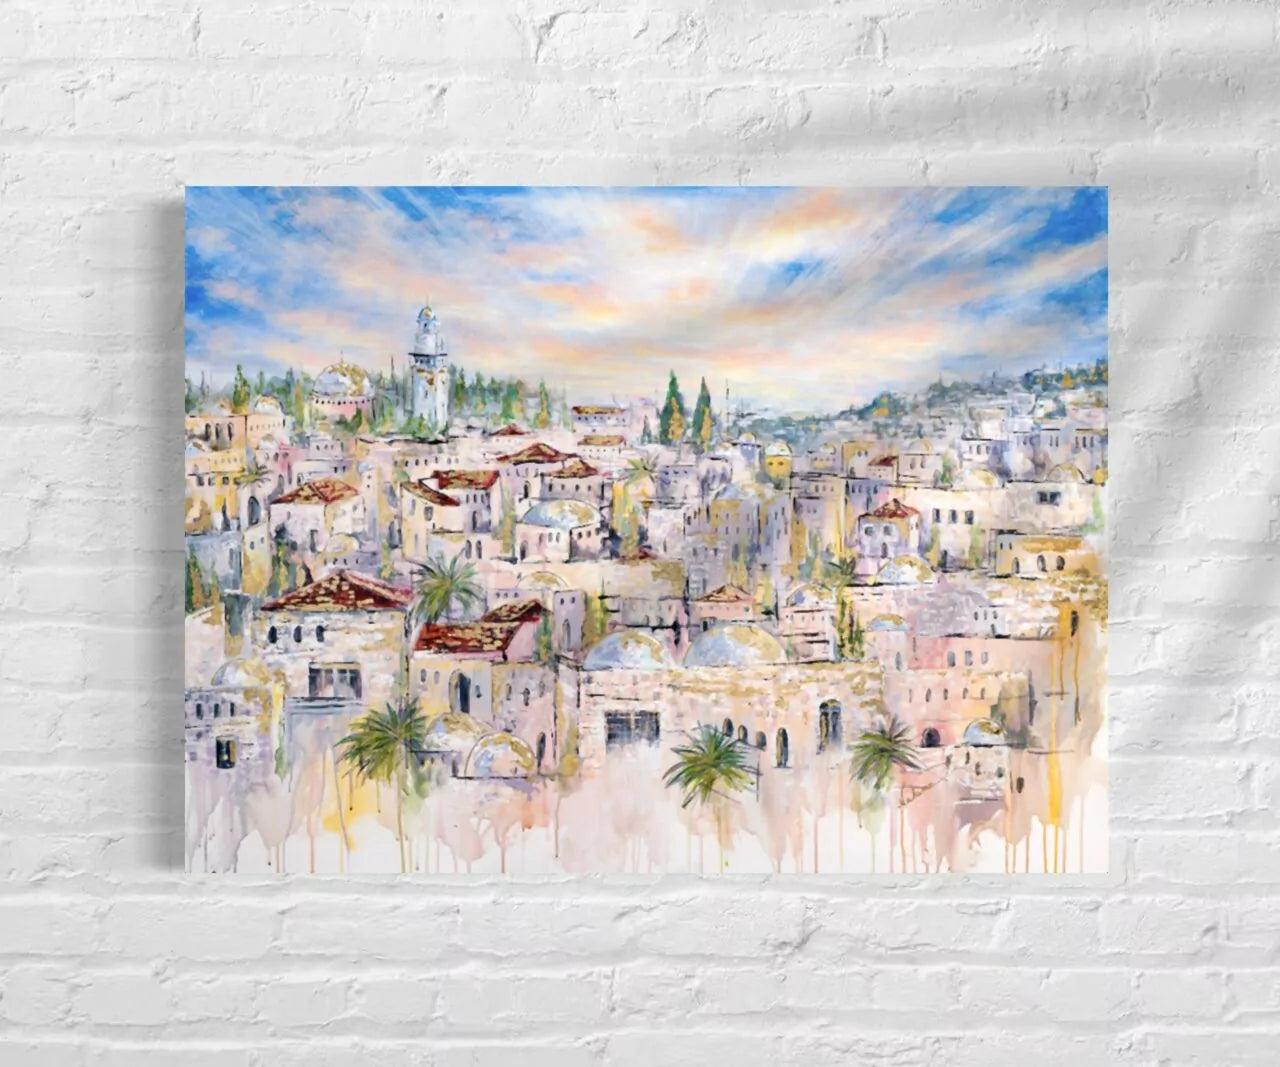 Image Of A Picture Of Jerusalem For Decorating The Sukkah On A Wall